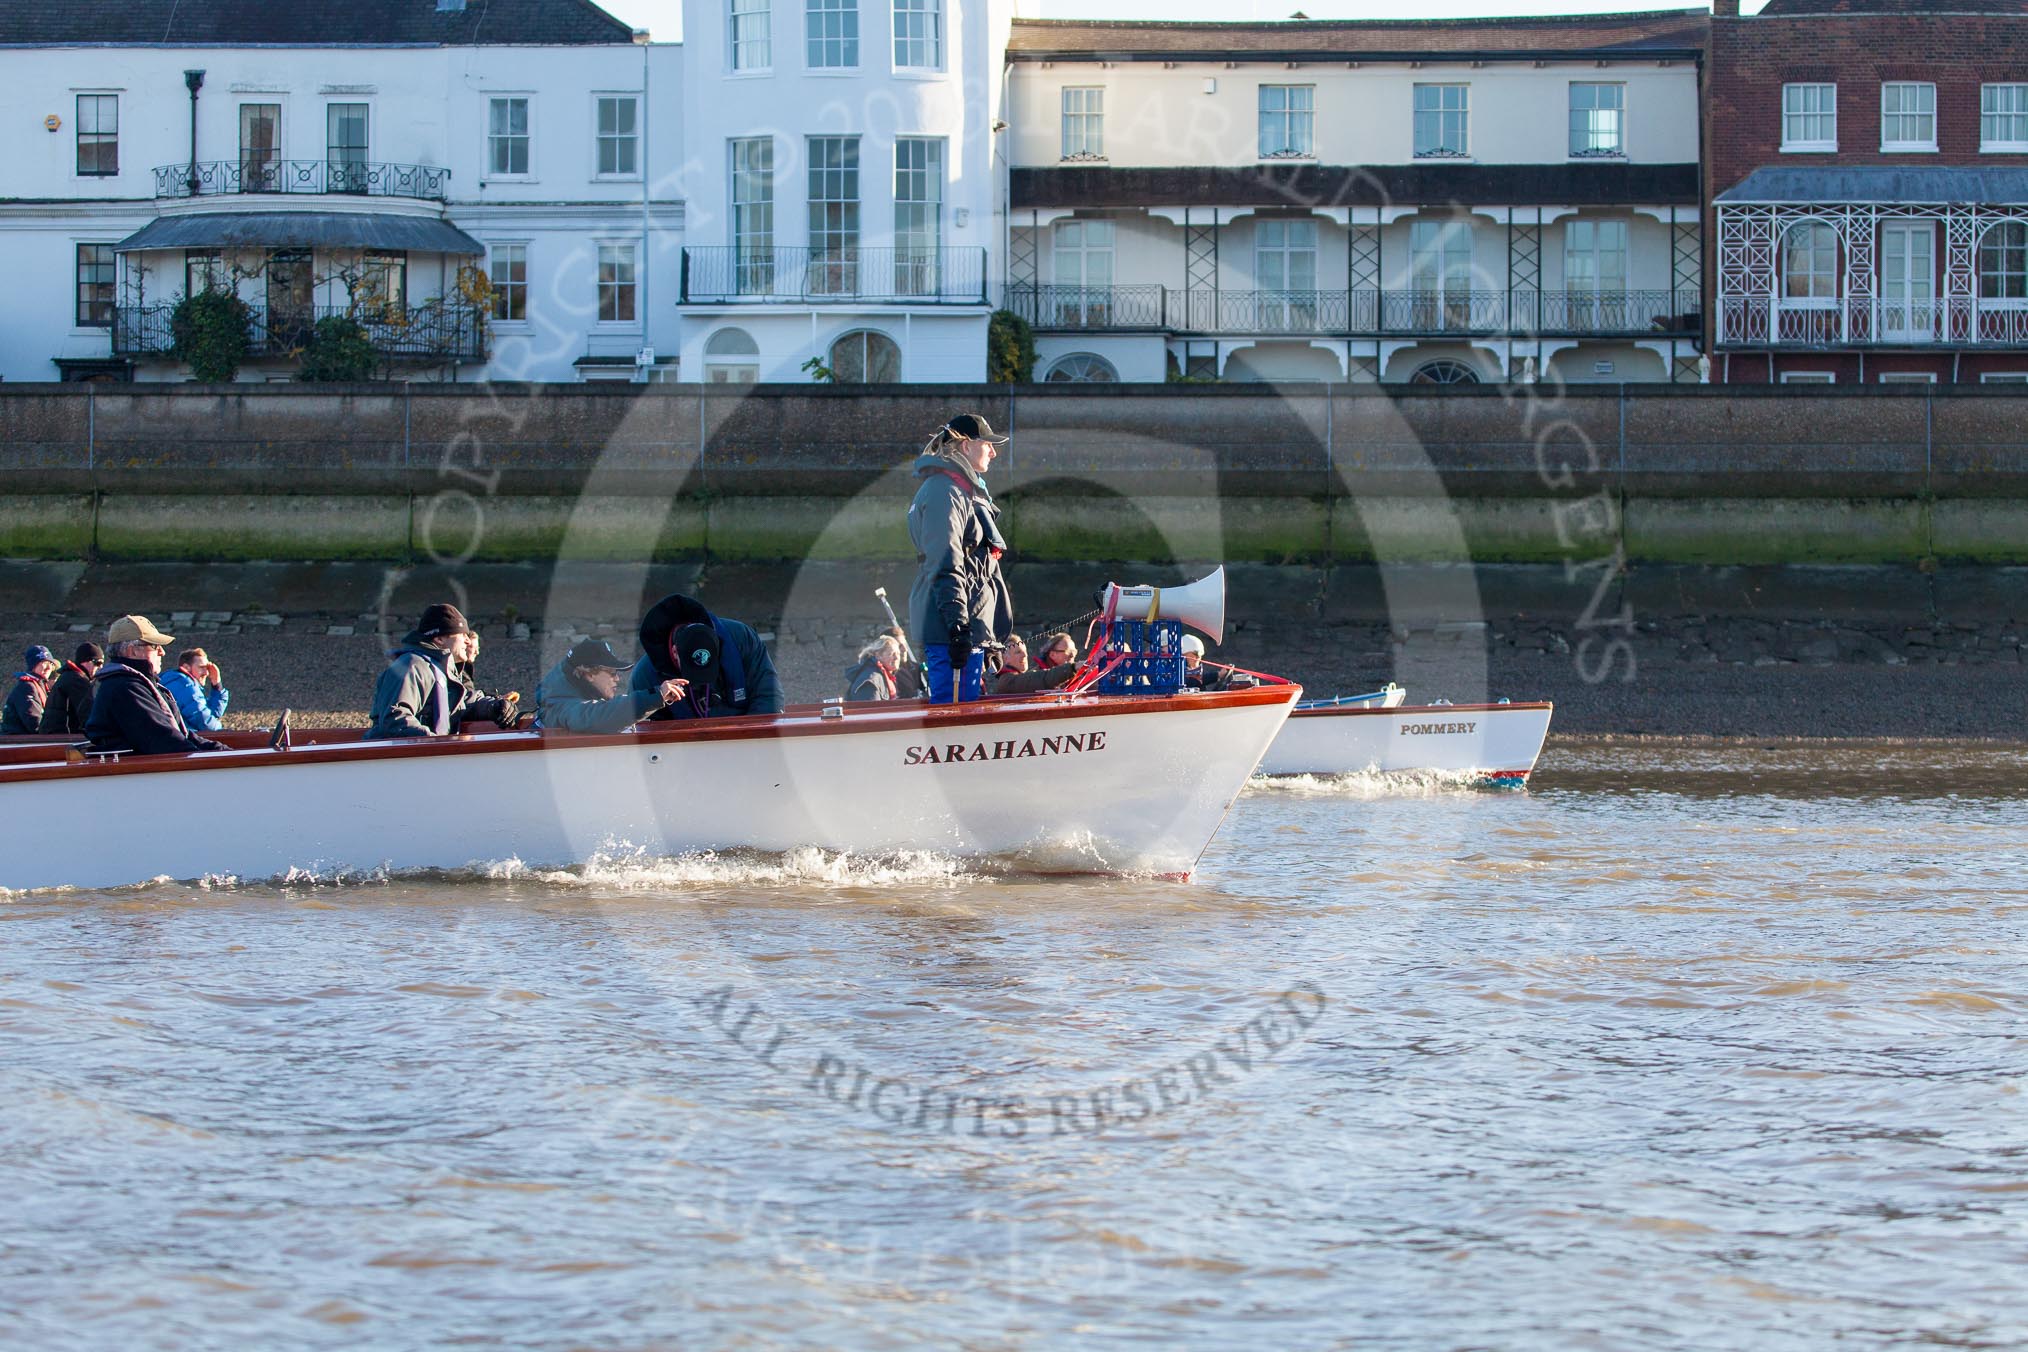 The Boat Race season 2014 - Women's Trial VIIIs (OUWBC, Oxford): The race umpire, Sarah Winckless, in one of the launches following the race..
River Thames between Putney Bridge and Mortlake,
London SW15,

United Kingdom,
on 19 December 2013 at 13:00, image #204